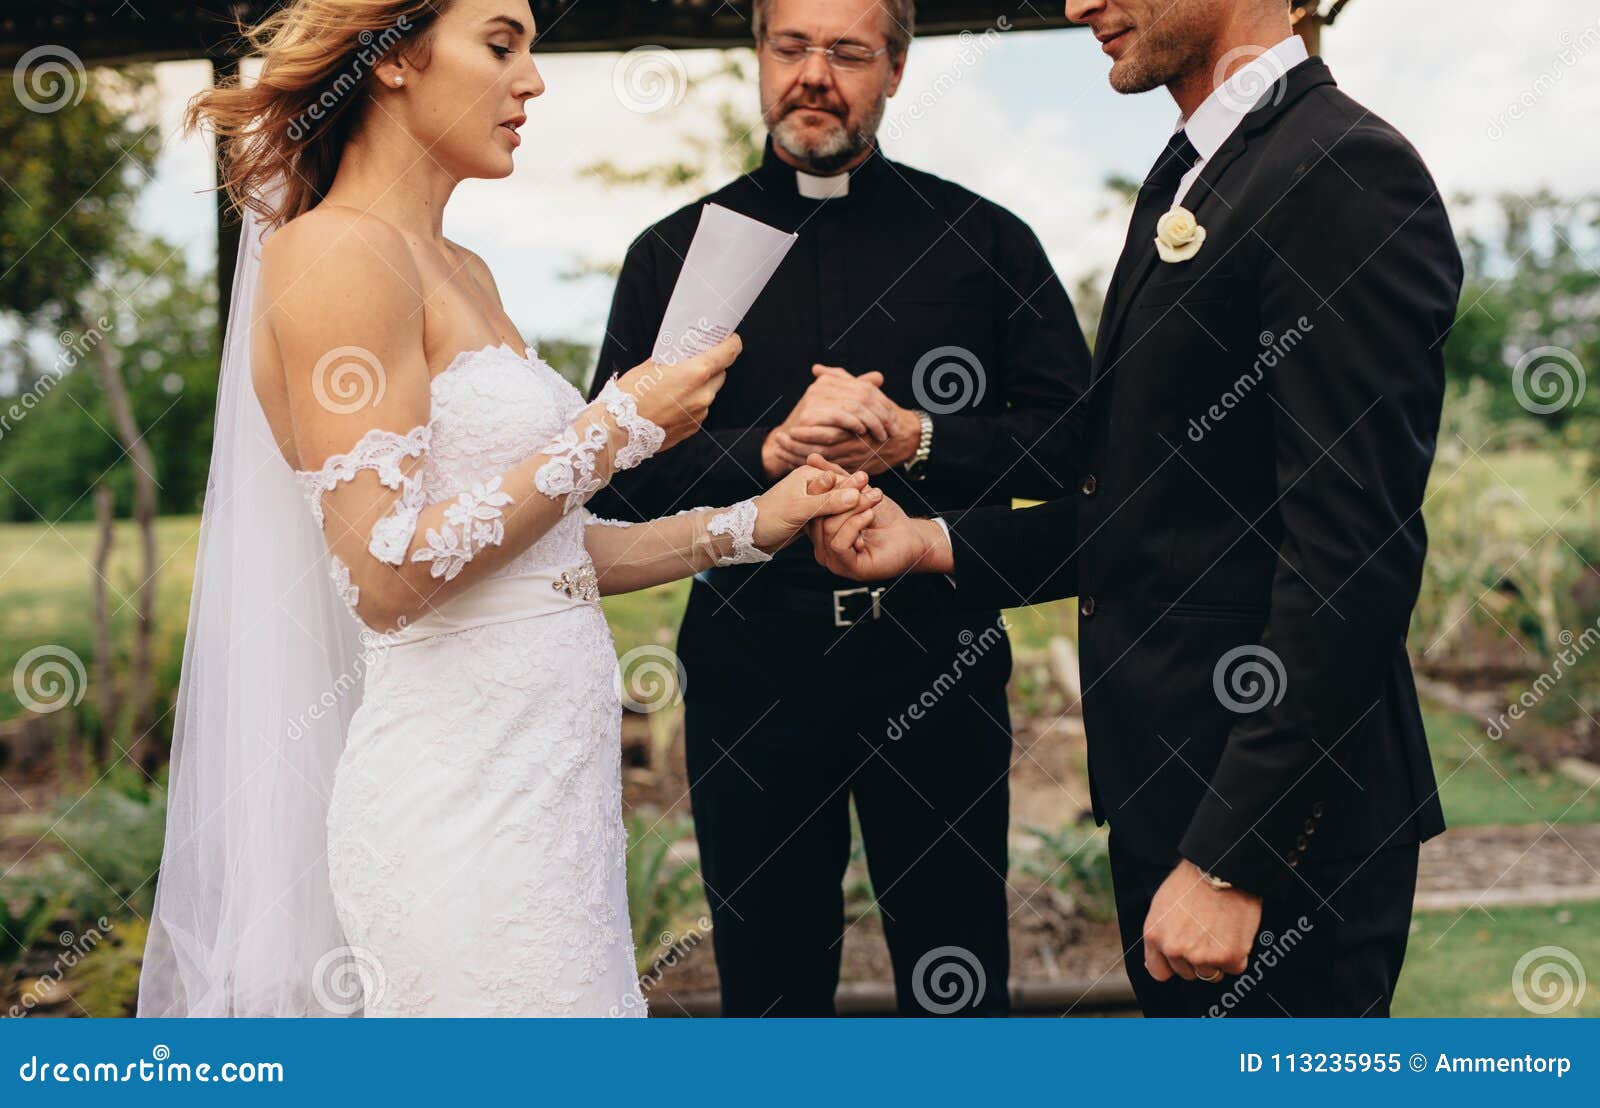 Couple Exchanging Vows On Wedding Ceremony Stock Image Image Of